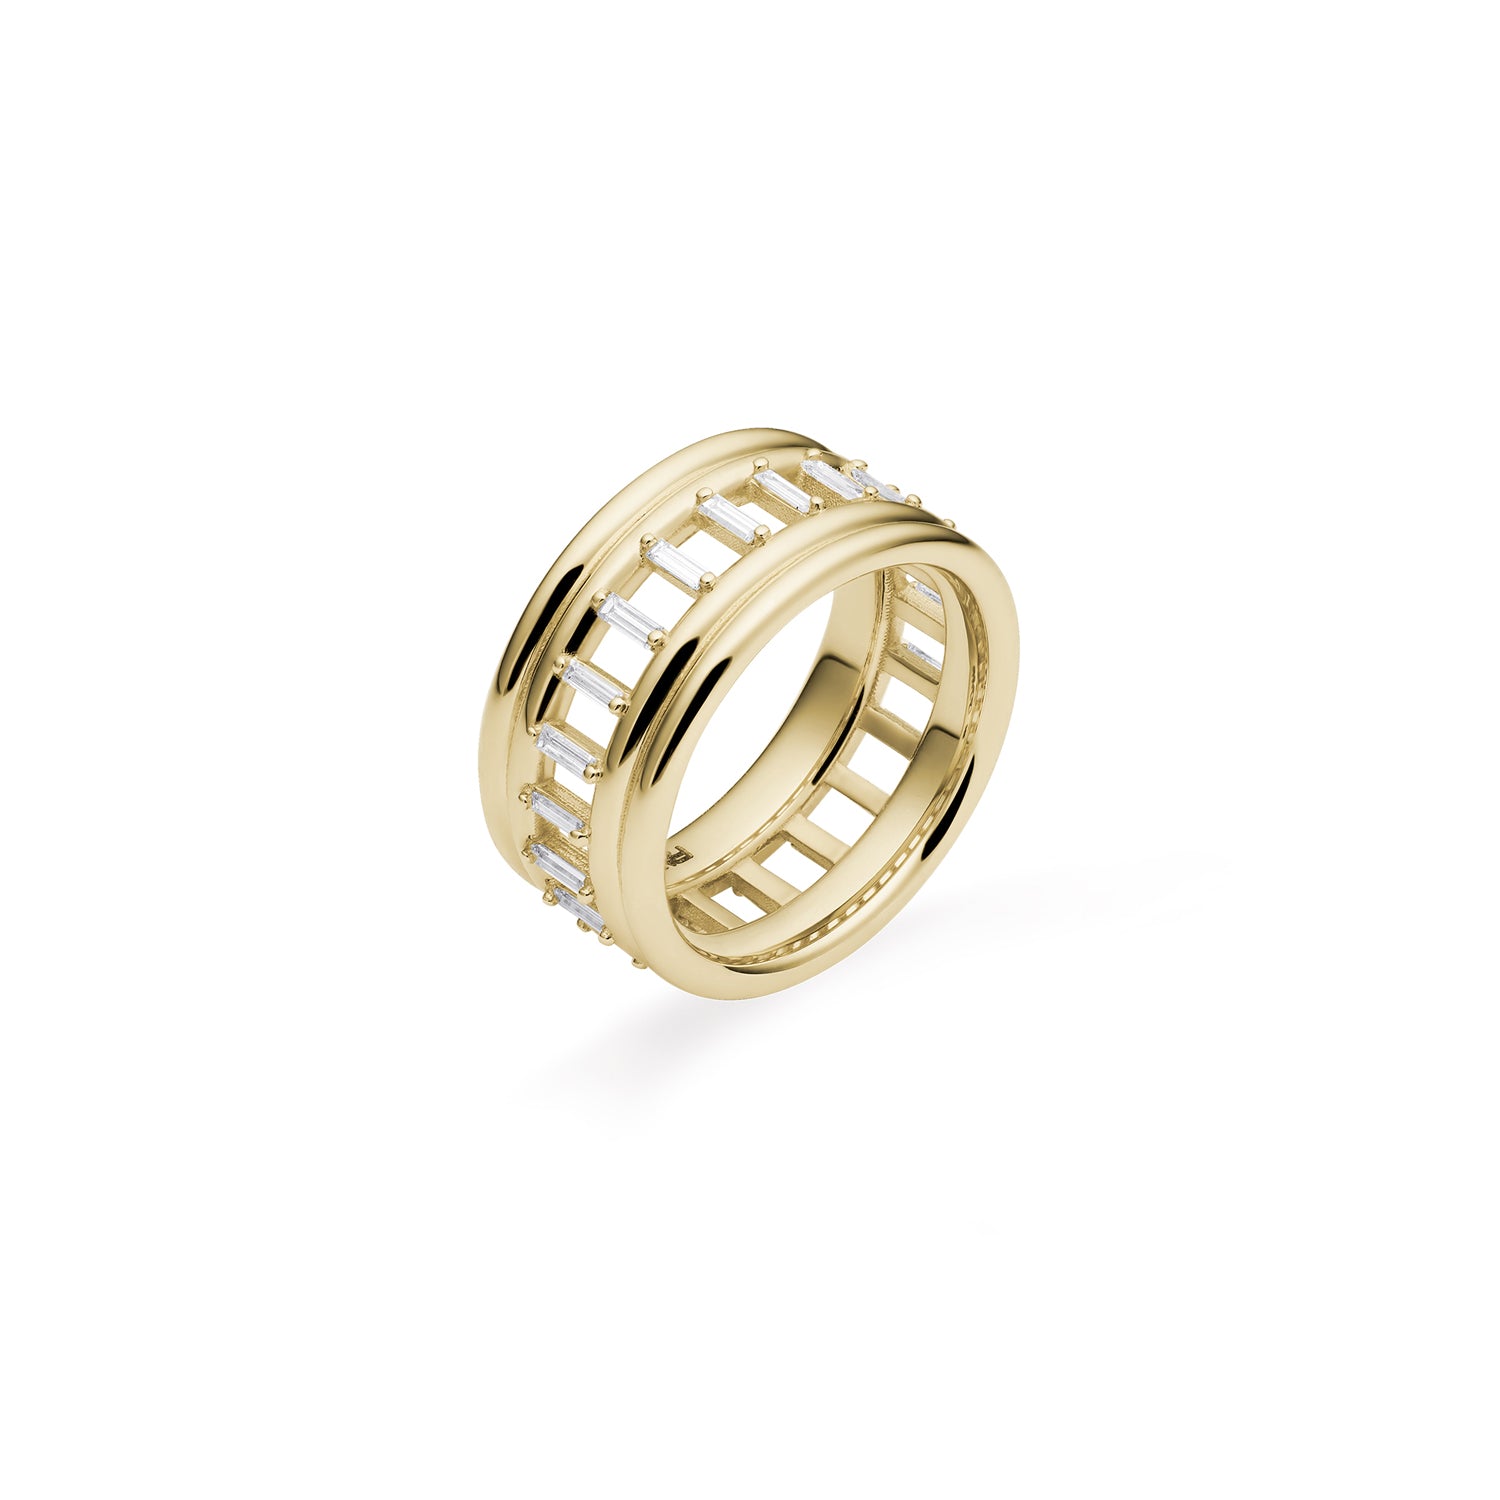 Ring Sizer - Vincents Fine Jewelry